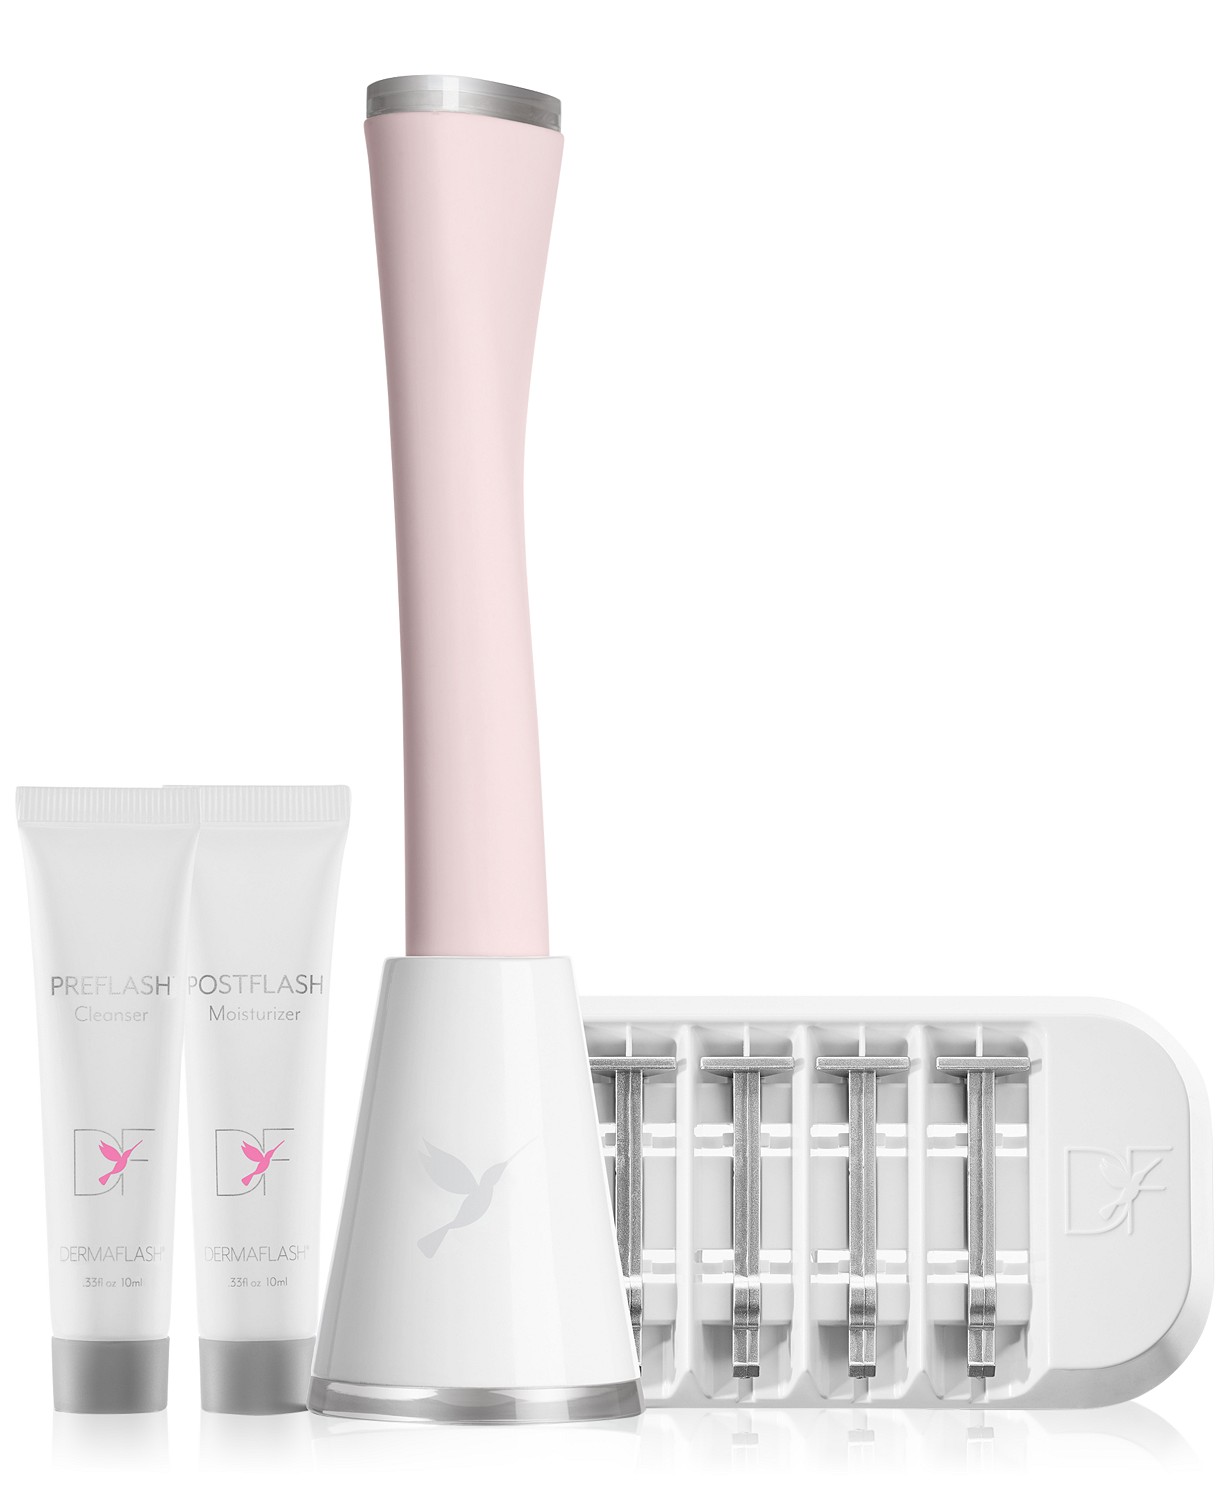 ($199 Value) DERMAFLASH 2.0 LUXE Anti-Aging Dermaplaning Exfoliation Device, Pink - image 1 of 12